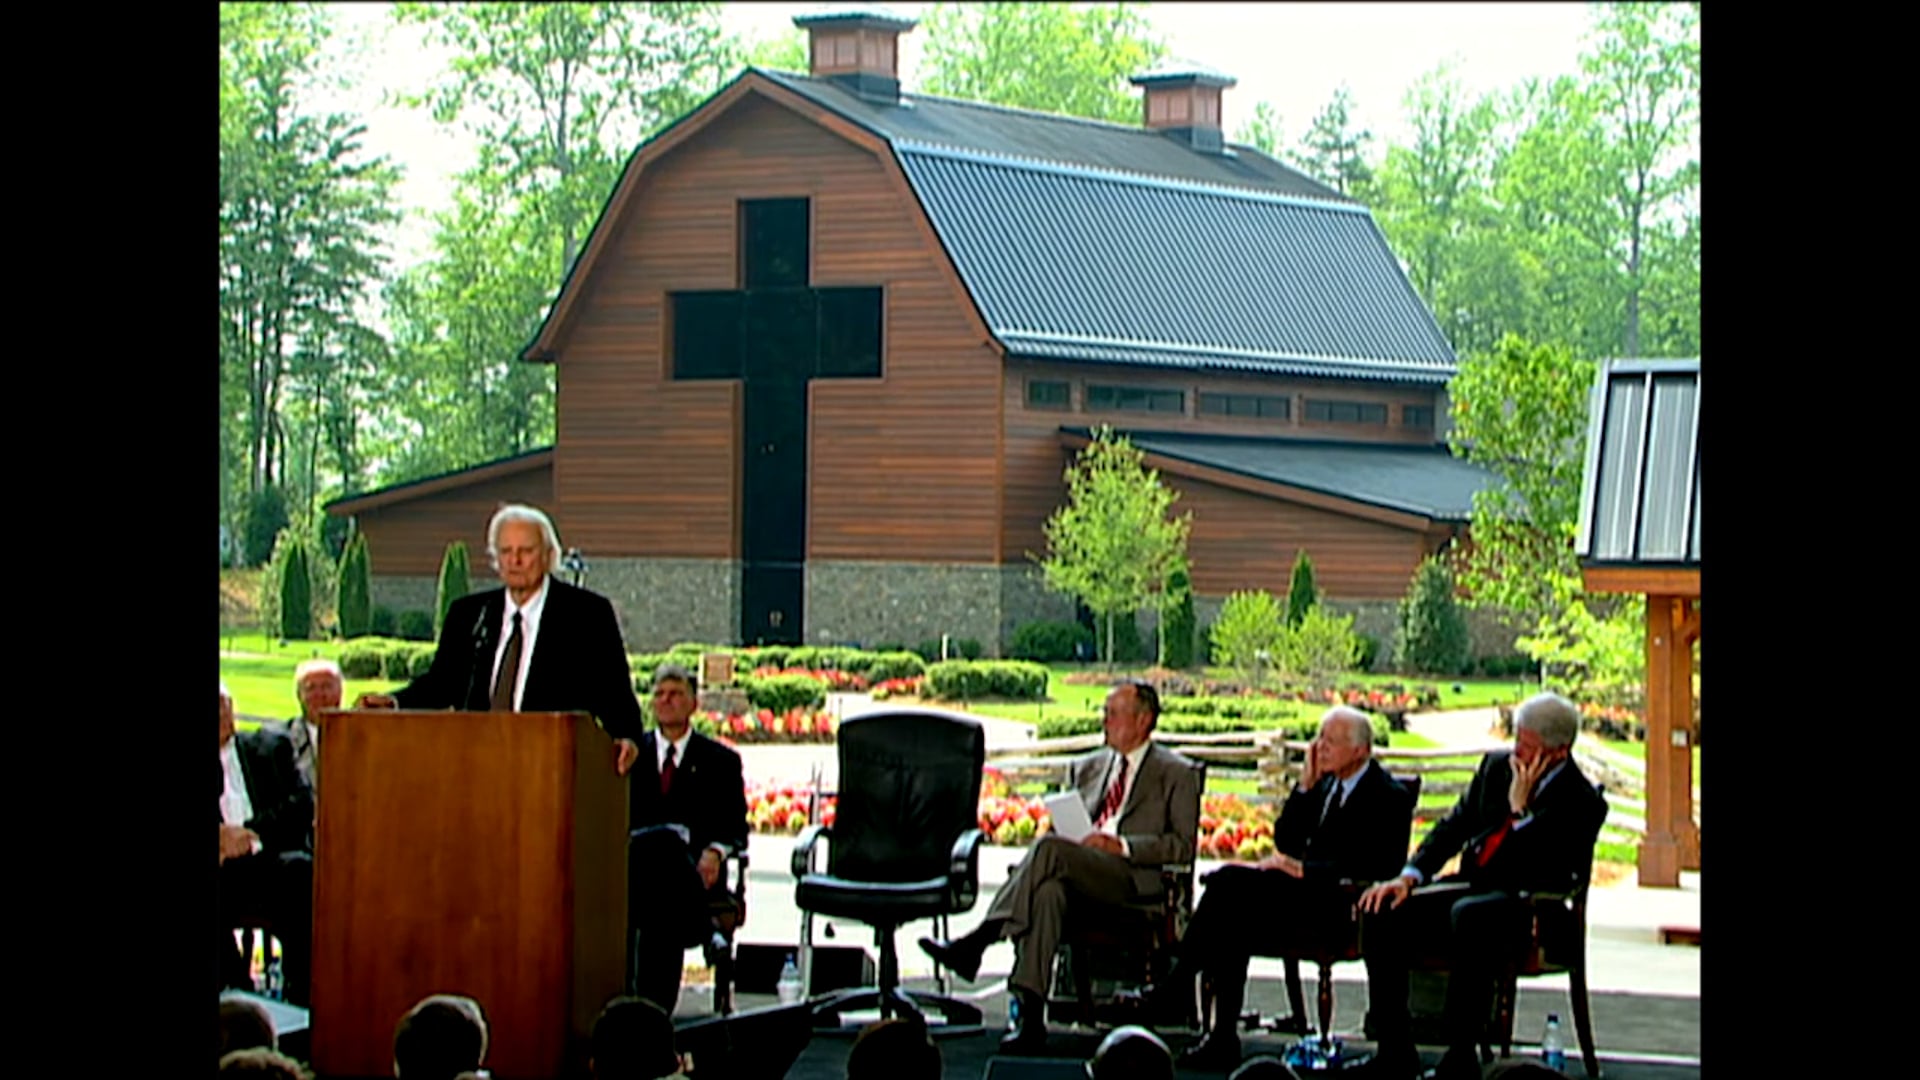 Billy Graham Library in Charlotte, NC presented by the Life in the Carolinas TV Show